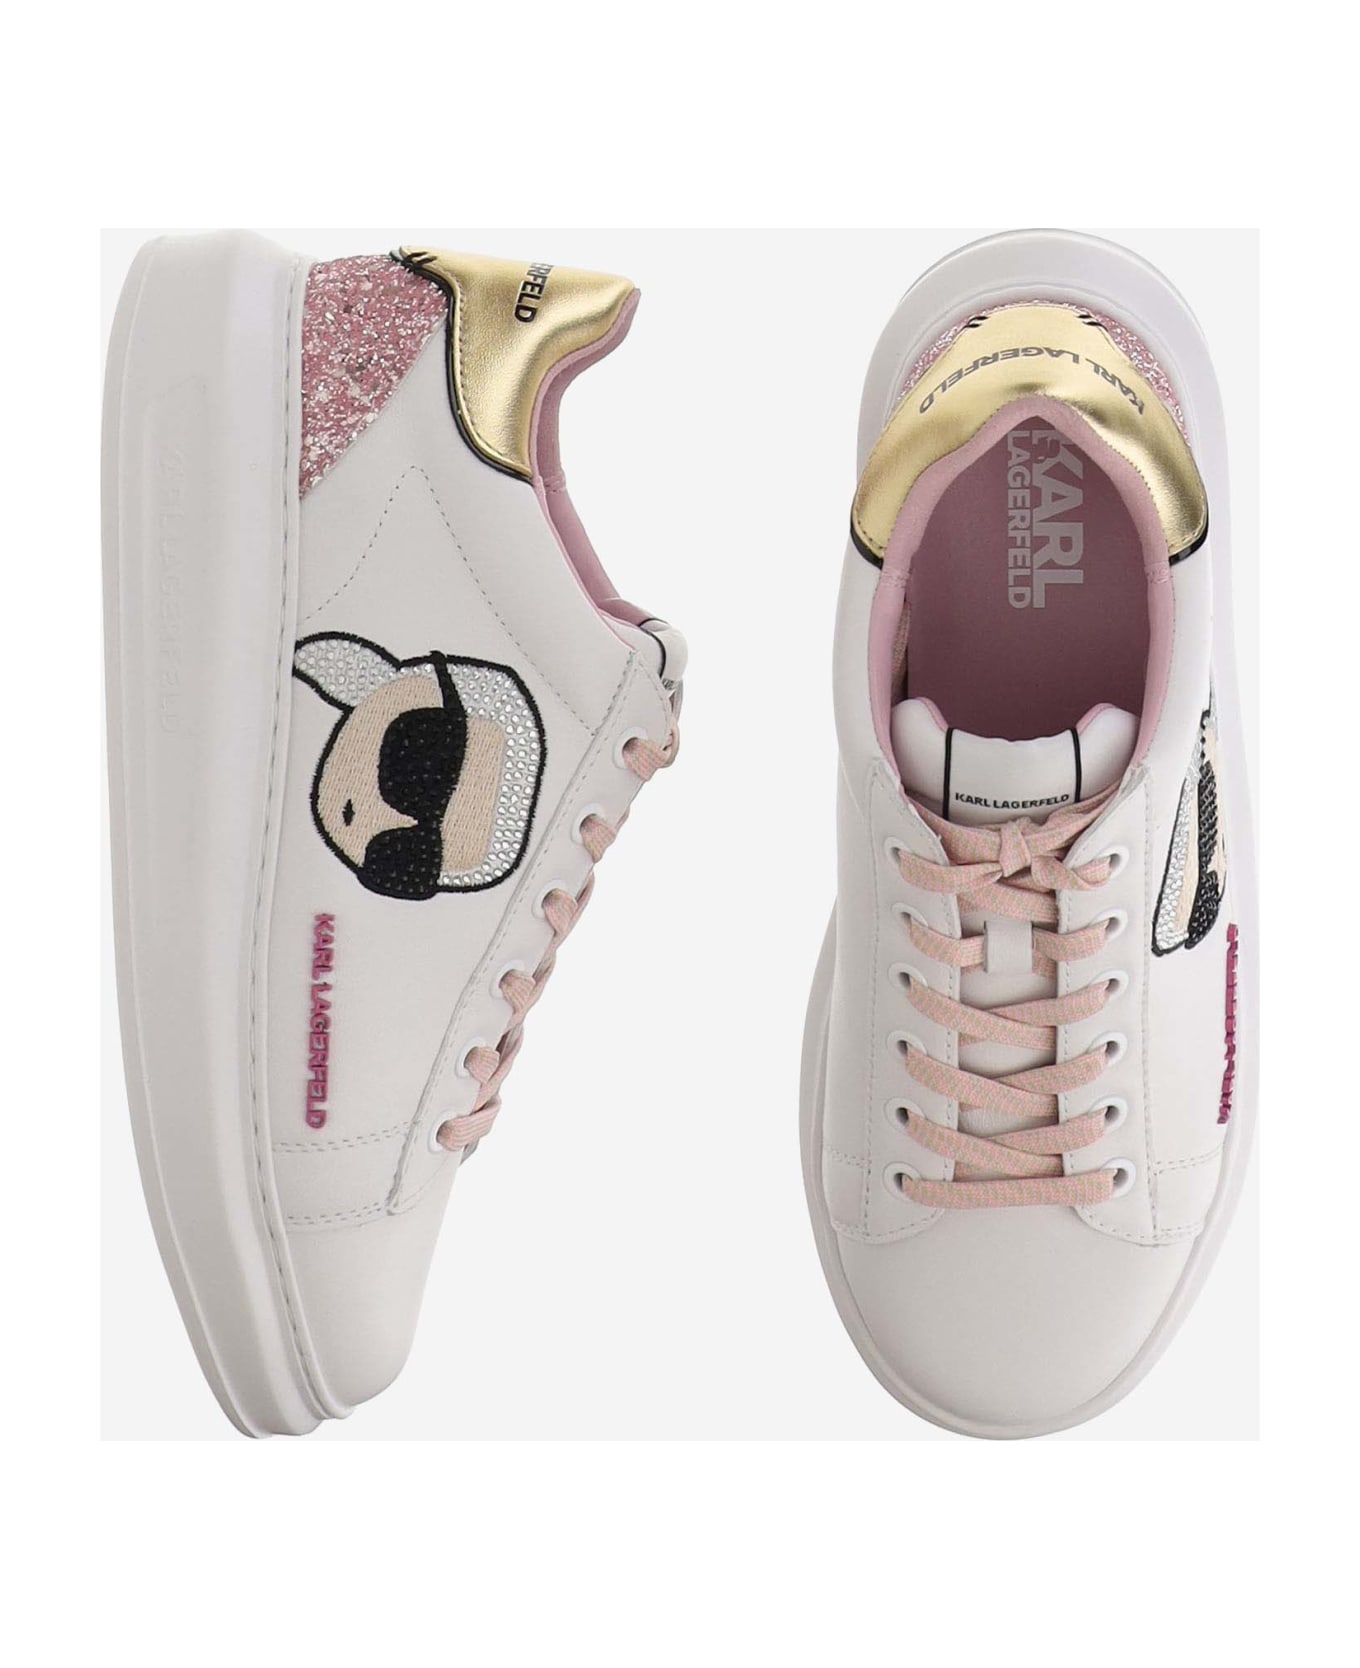 Karl Lagerfeld Leather Sneakers With Logo - White スニーカー